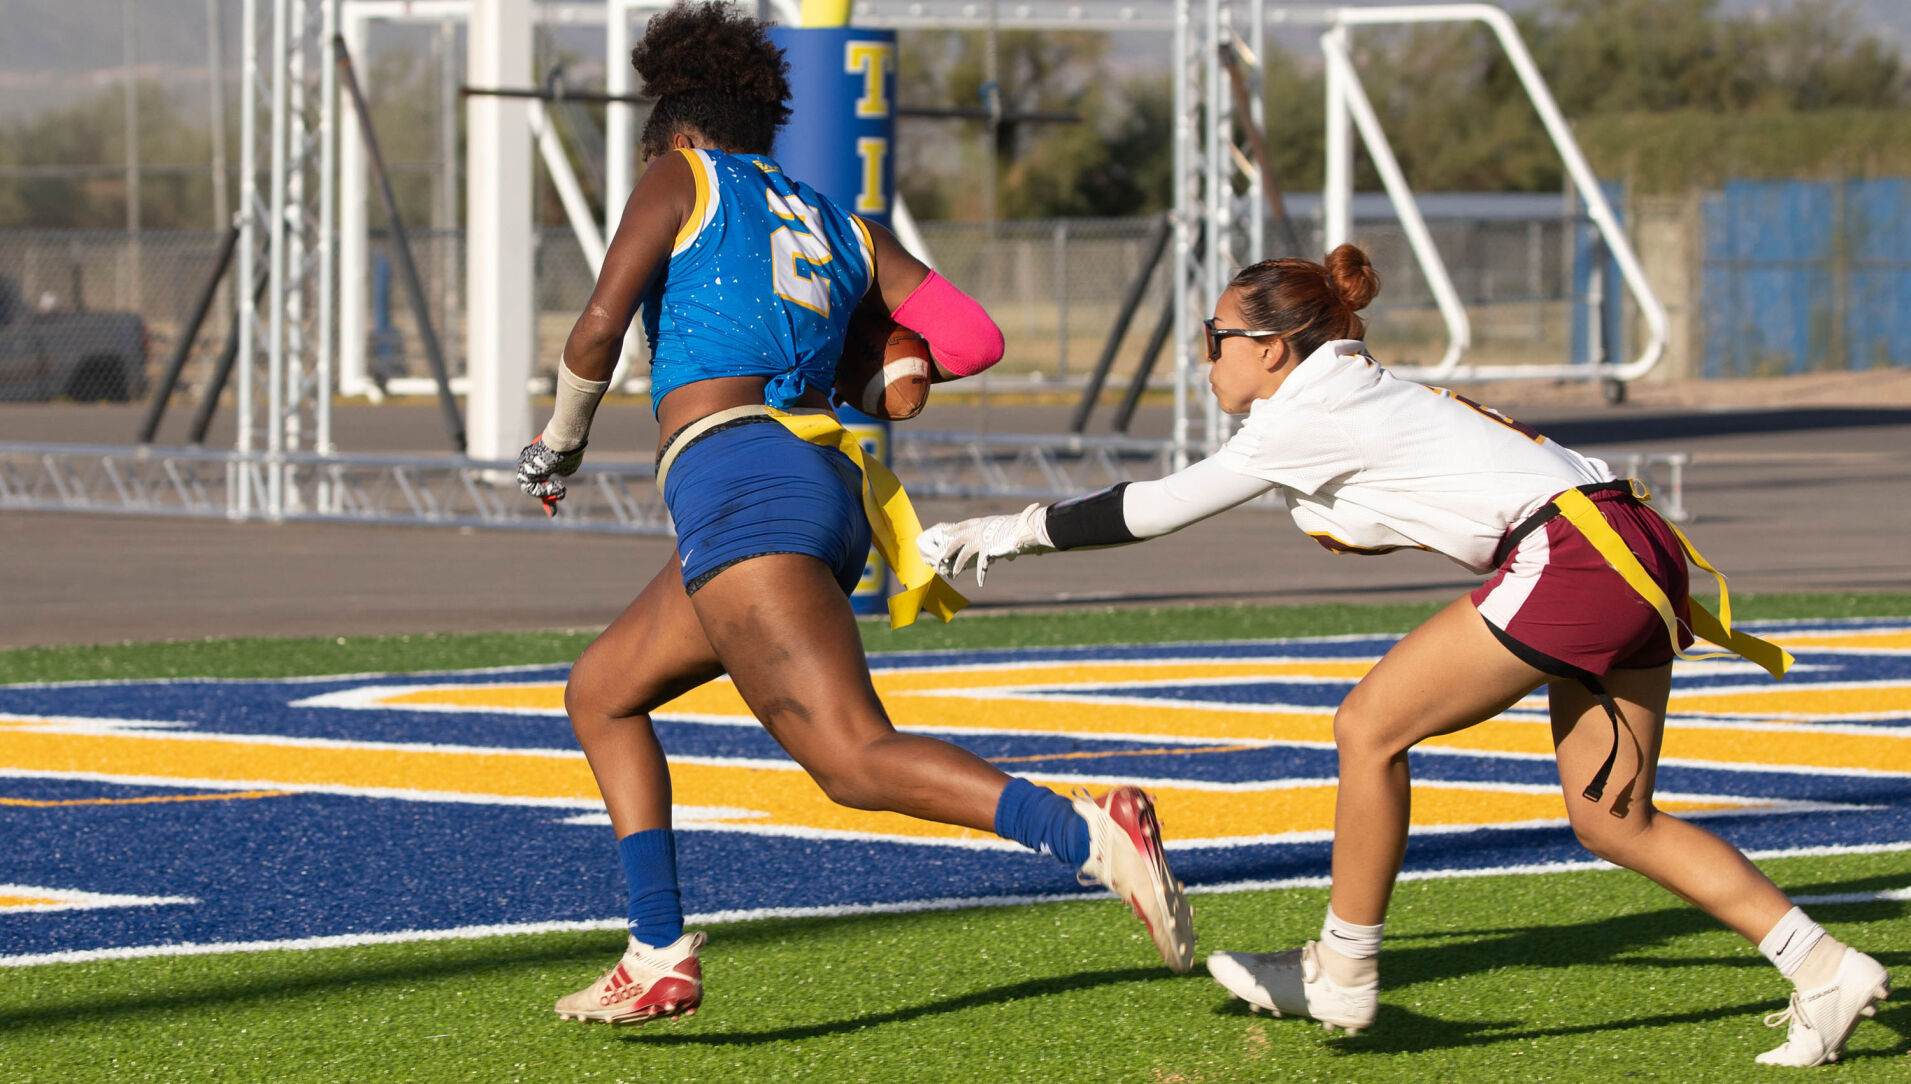 Marana HS (12-0) at home for girls flag football state playoff; Mountain View (8-2) on road